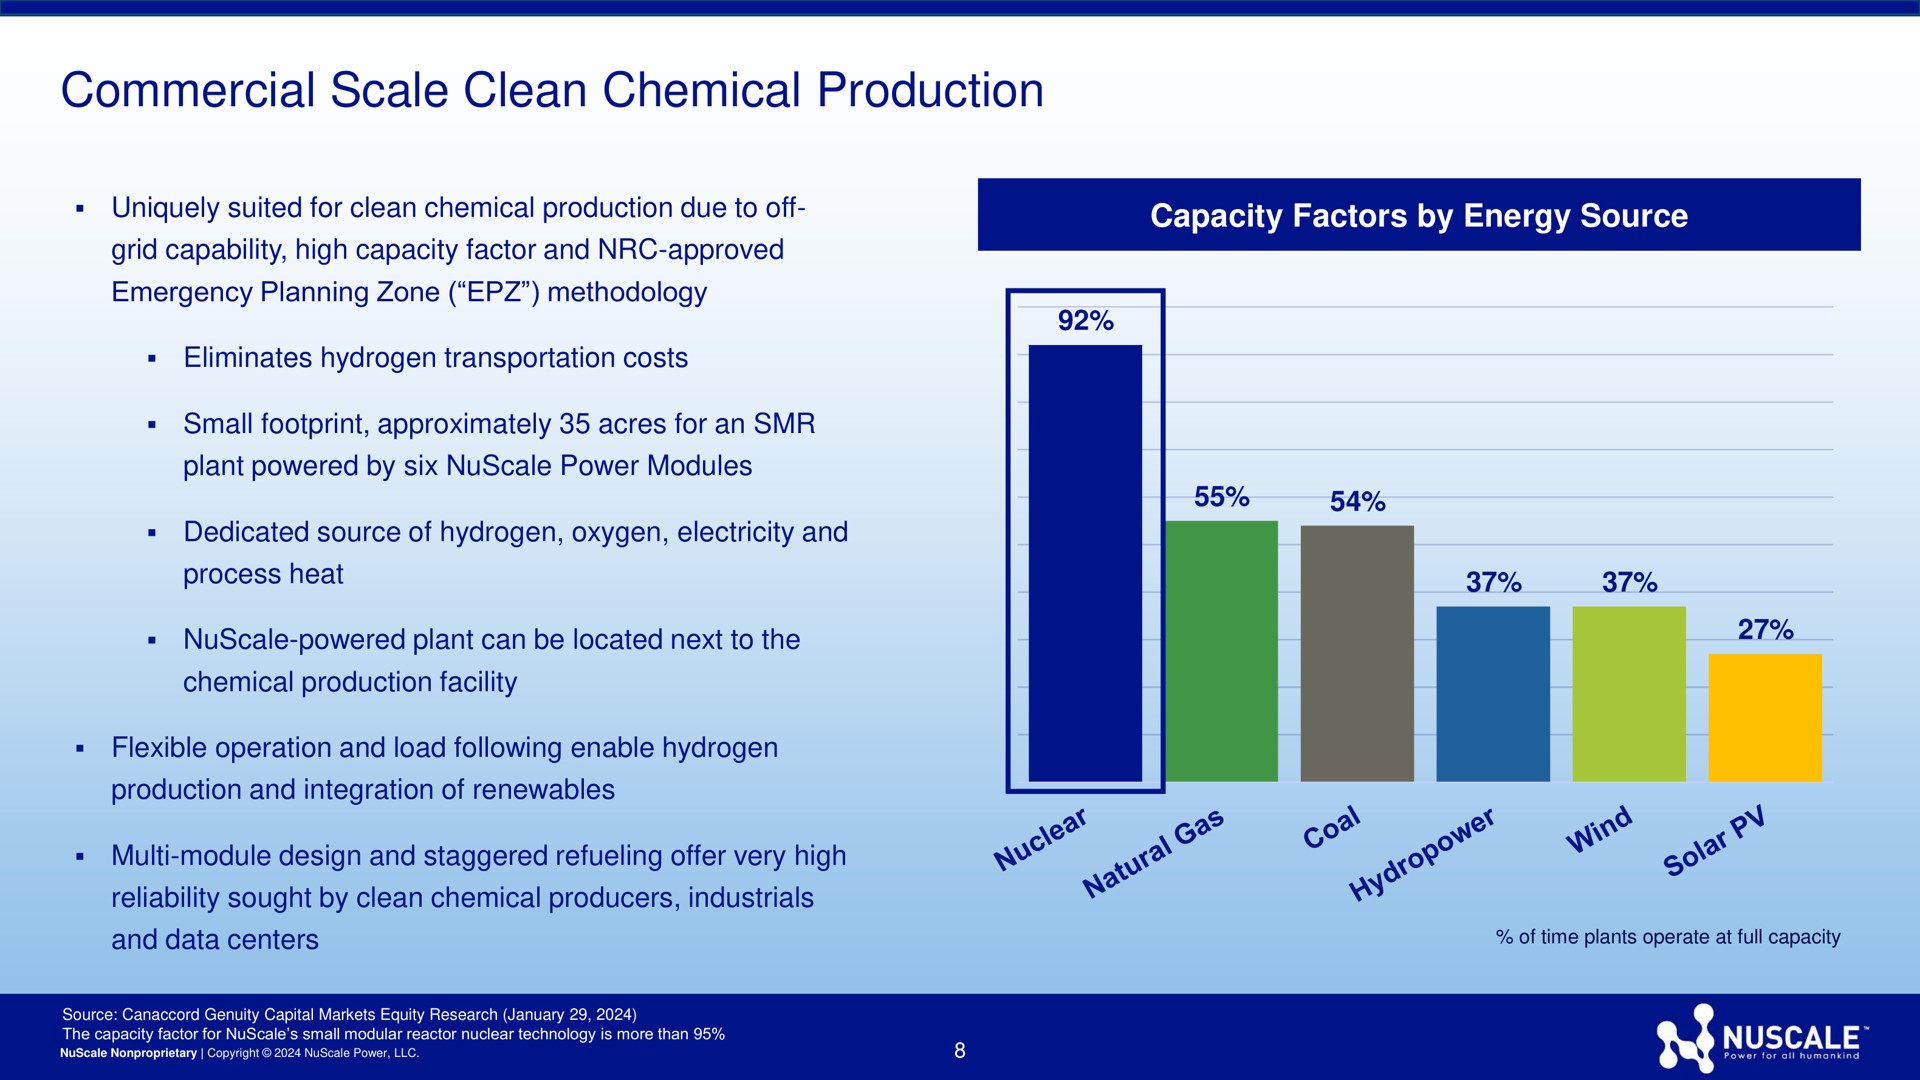 commercial scale clean chemical production | Nuscale